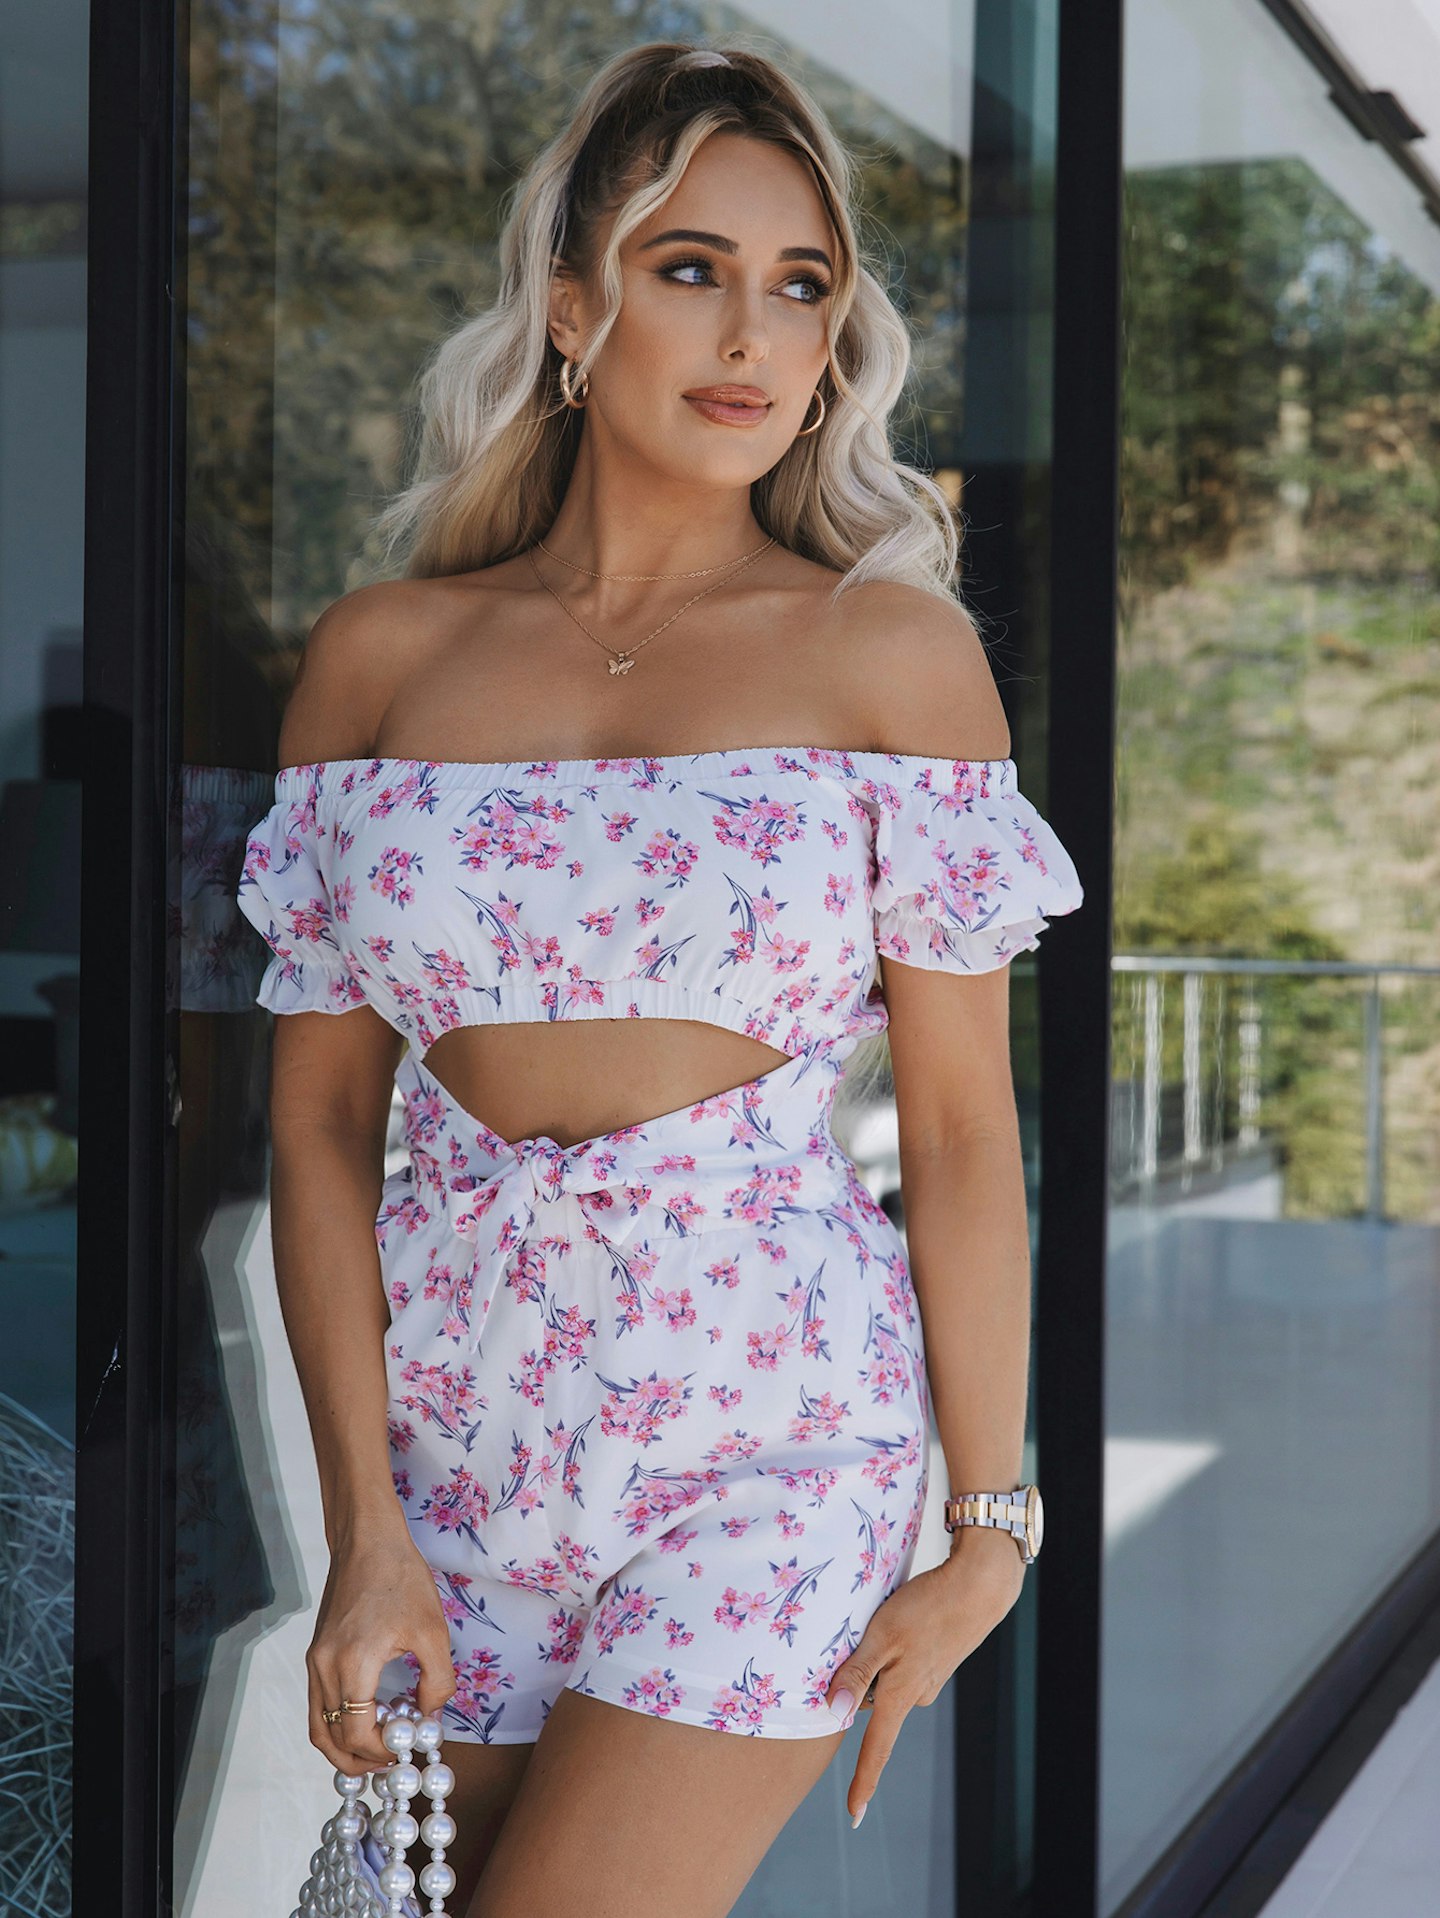 Amber Turner x SHEIN collection